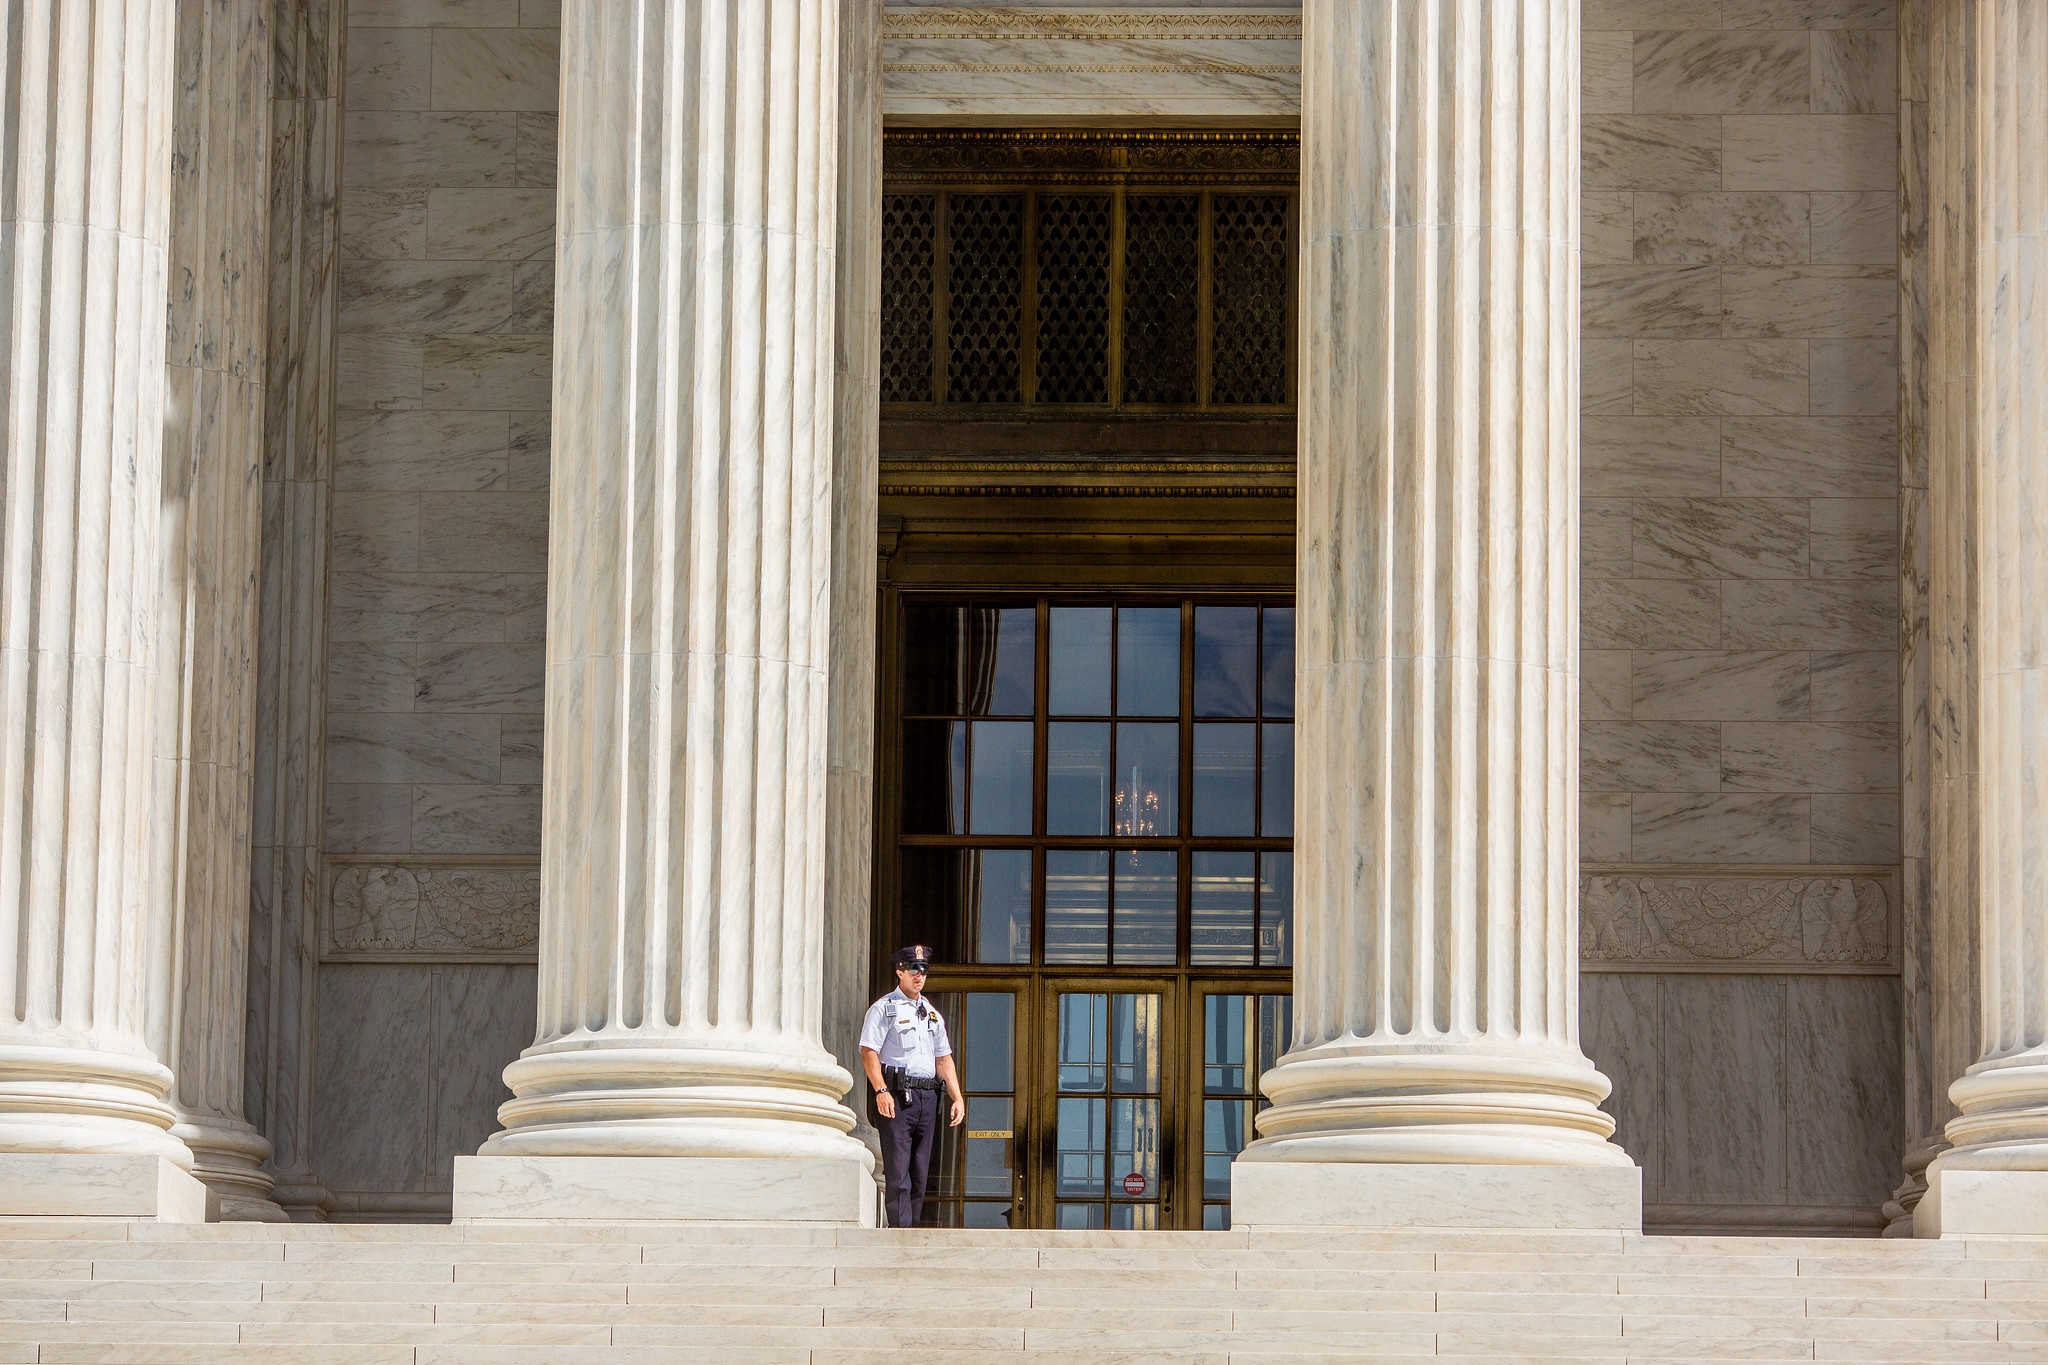 Guard standing on the Supreme Court steps.